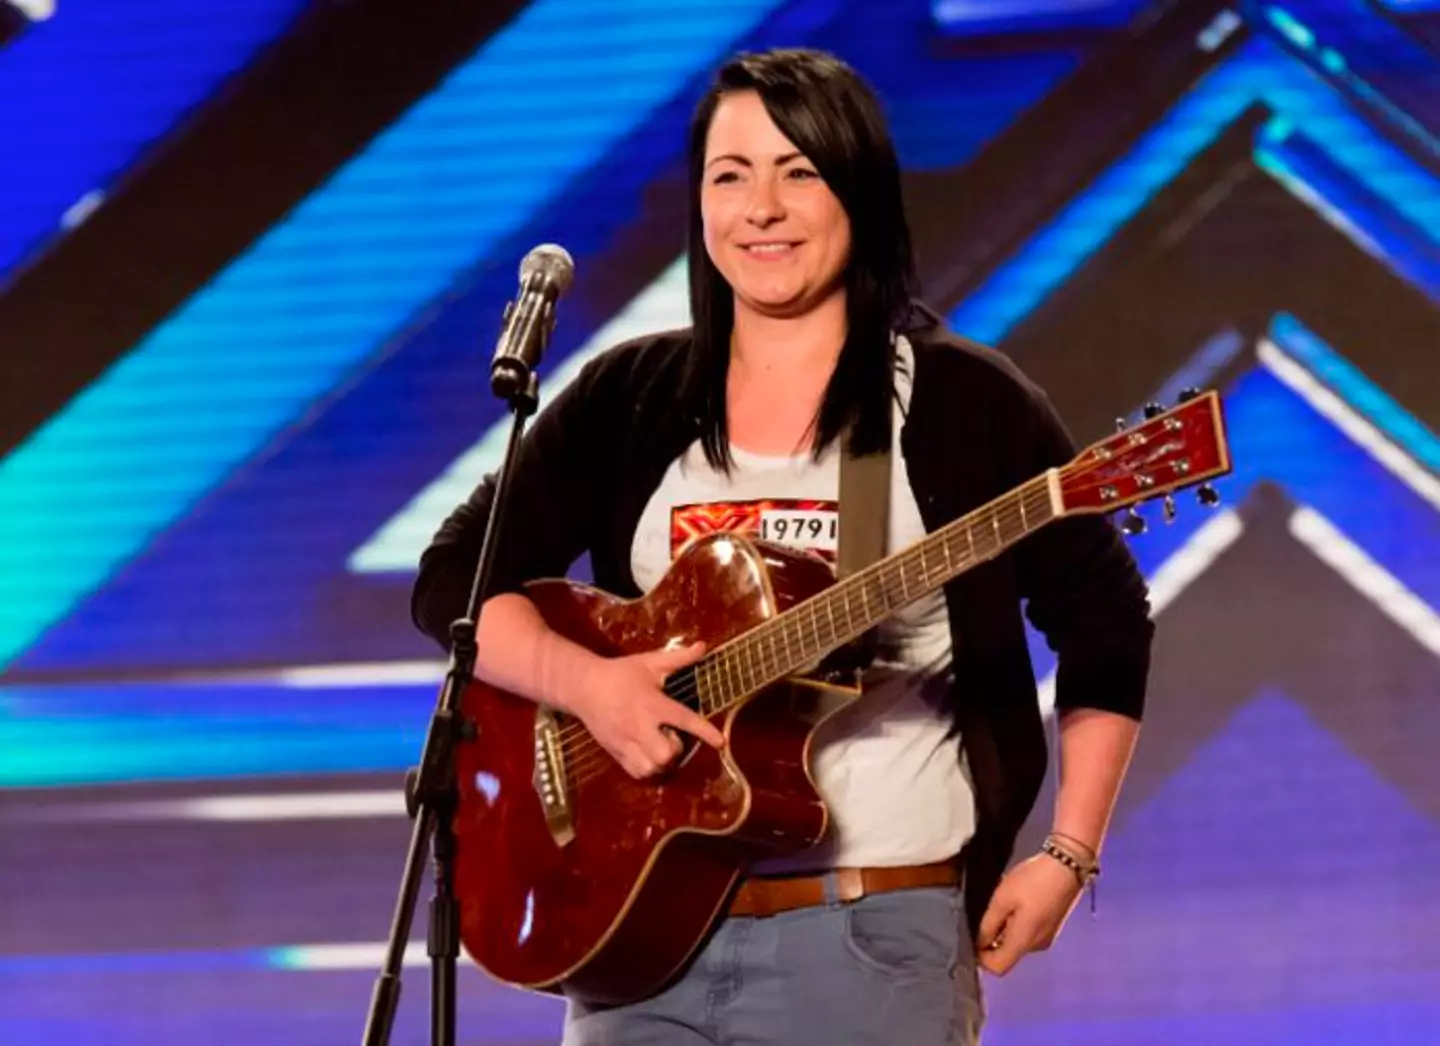 Lucy Spraggan has revealed she was raped while filming X Factor.